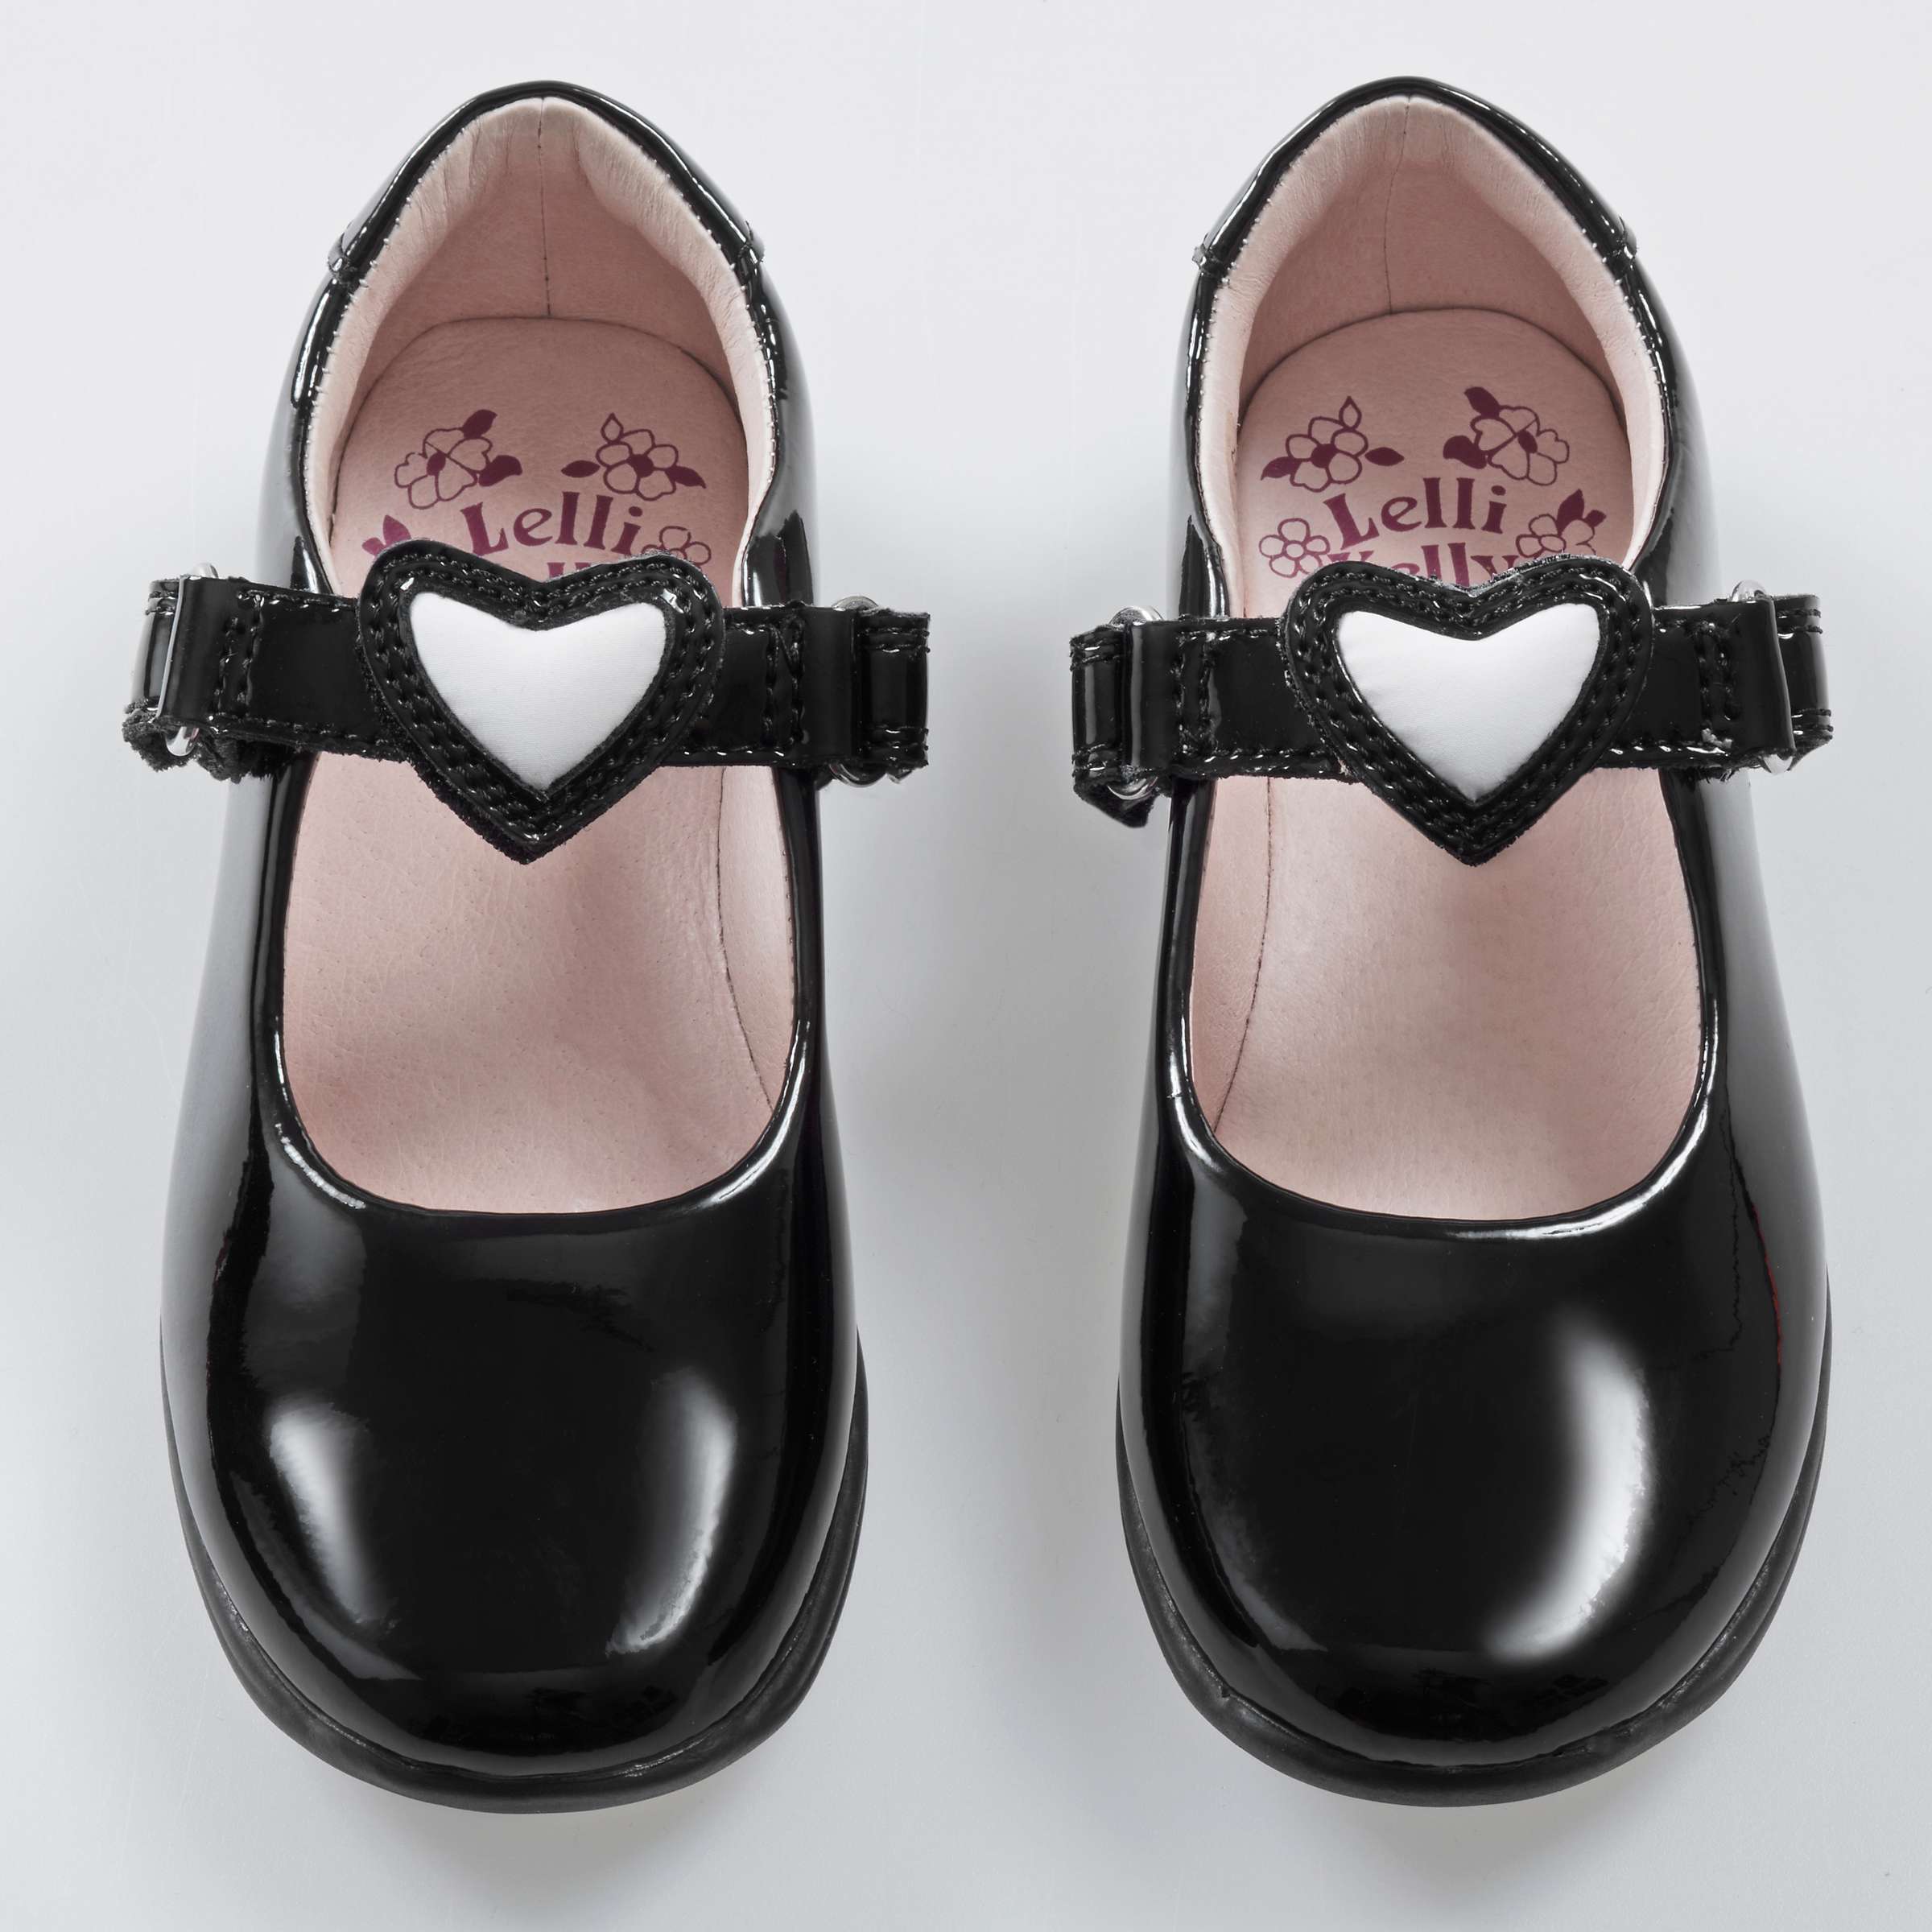 Buy Lelli Kelly Children's Dolly Heart Leather School Shoes, Black Patent Online at johnlewis.com